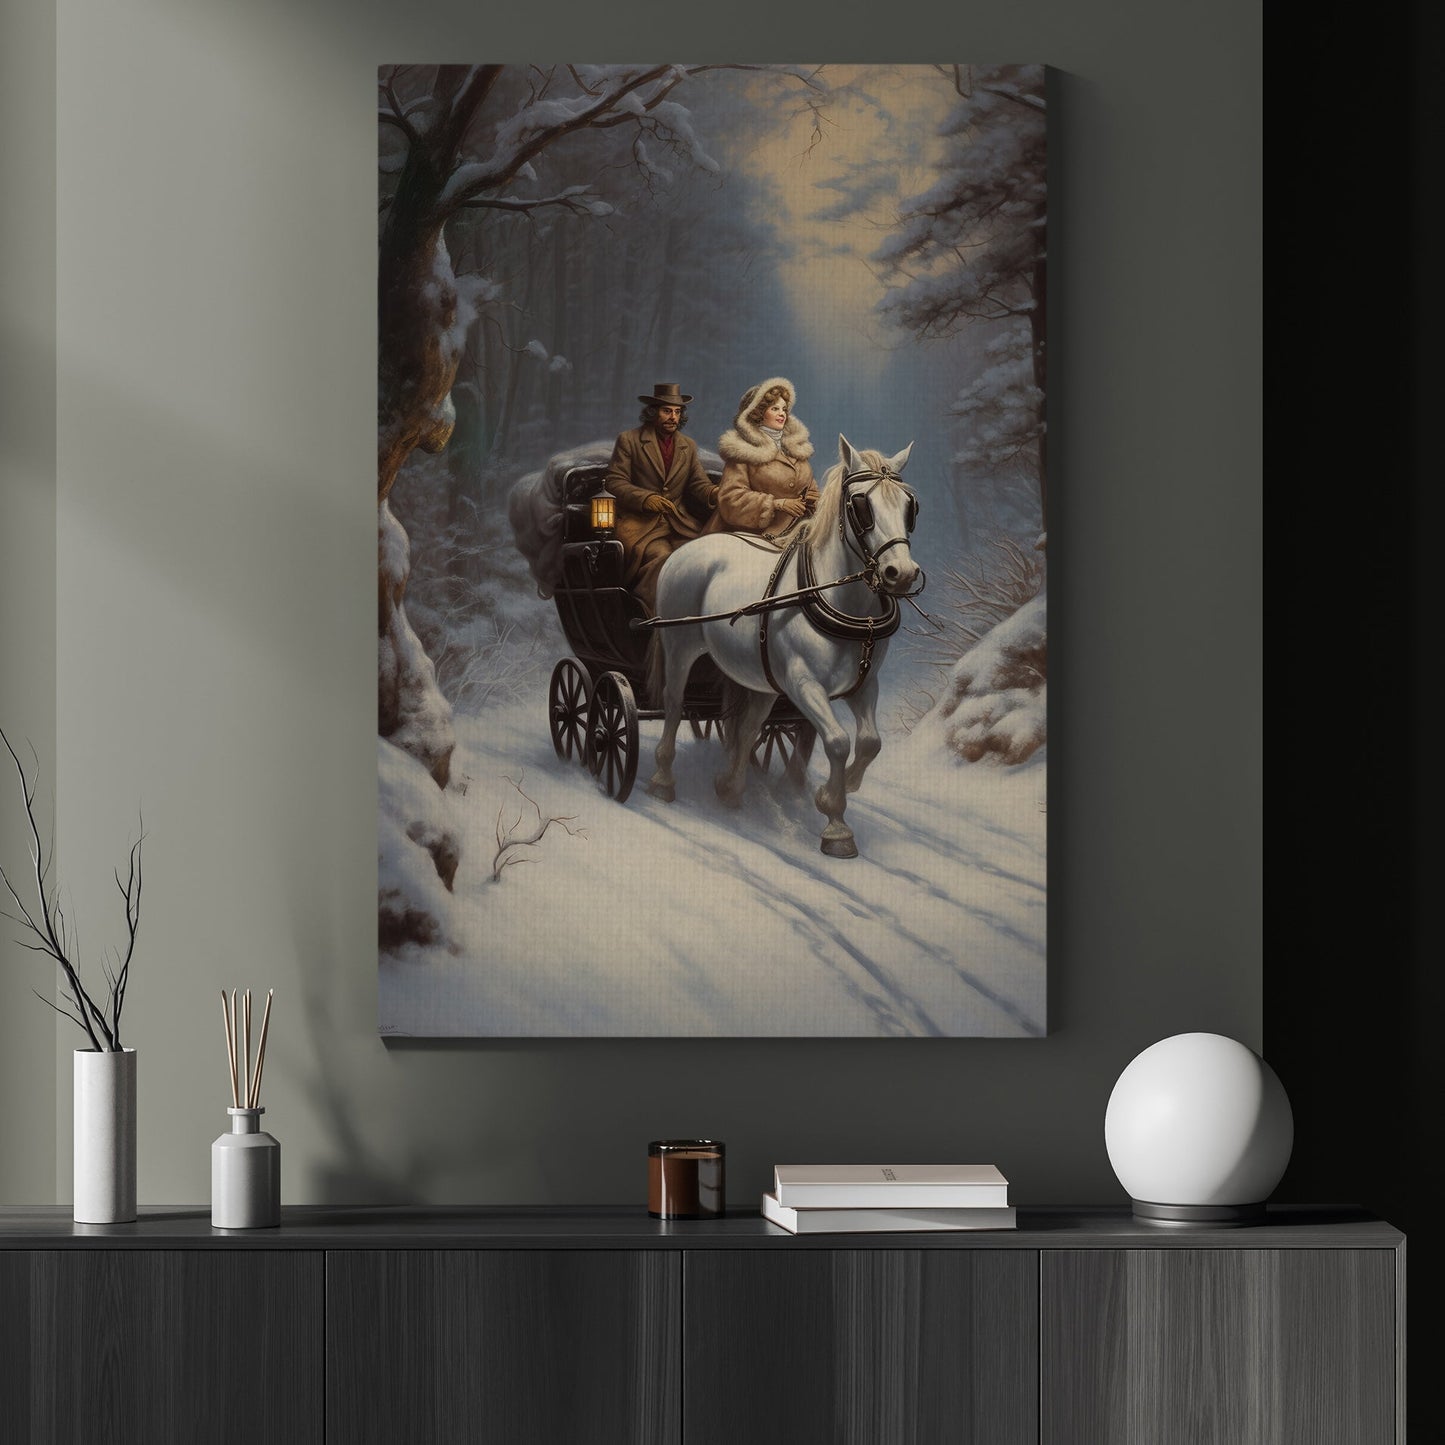 Victorian A Timeless Voyage Through The Winter, Horse Christmas Canvas Painting, Xmas Wall Art Decor - Poster Gift For Horse Lovers